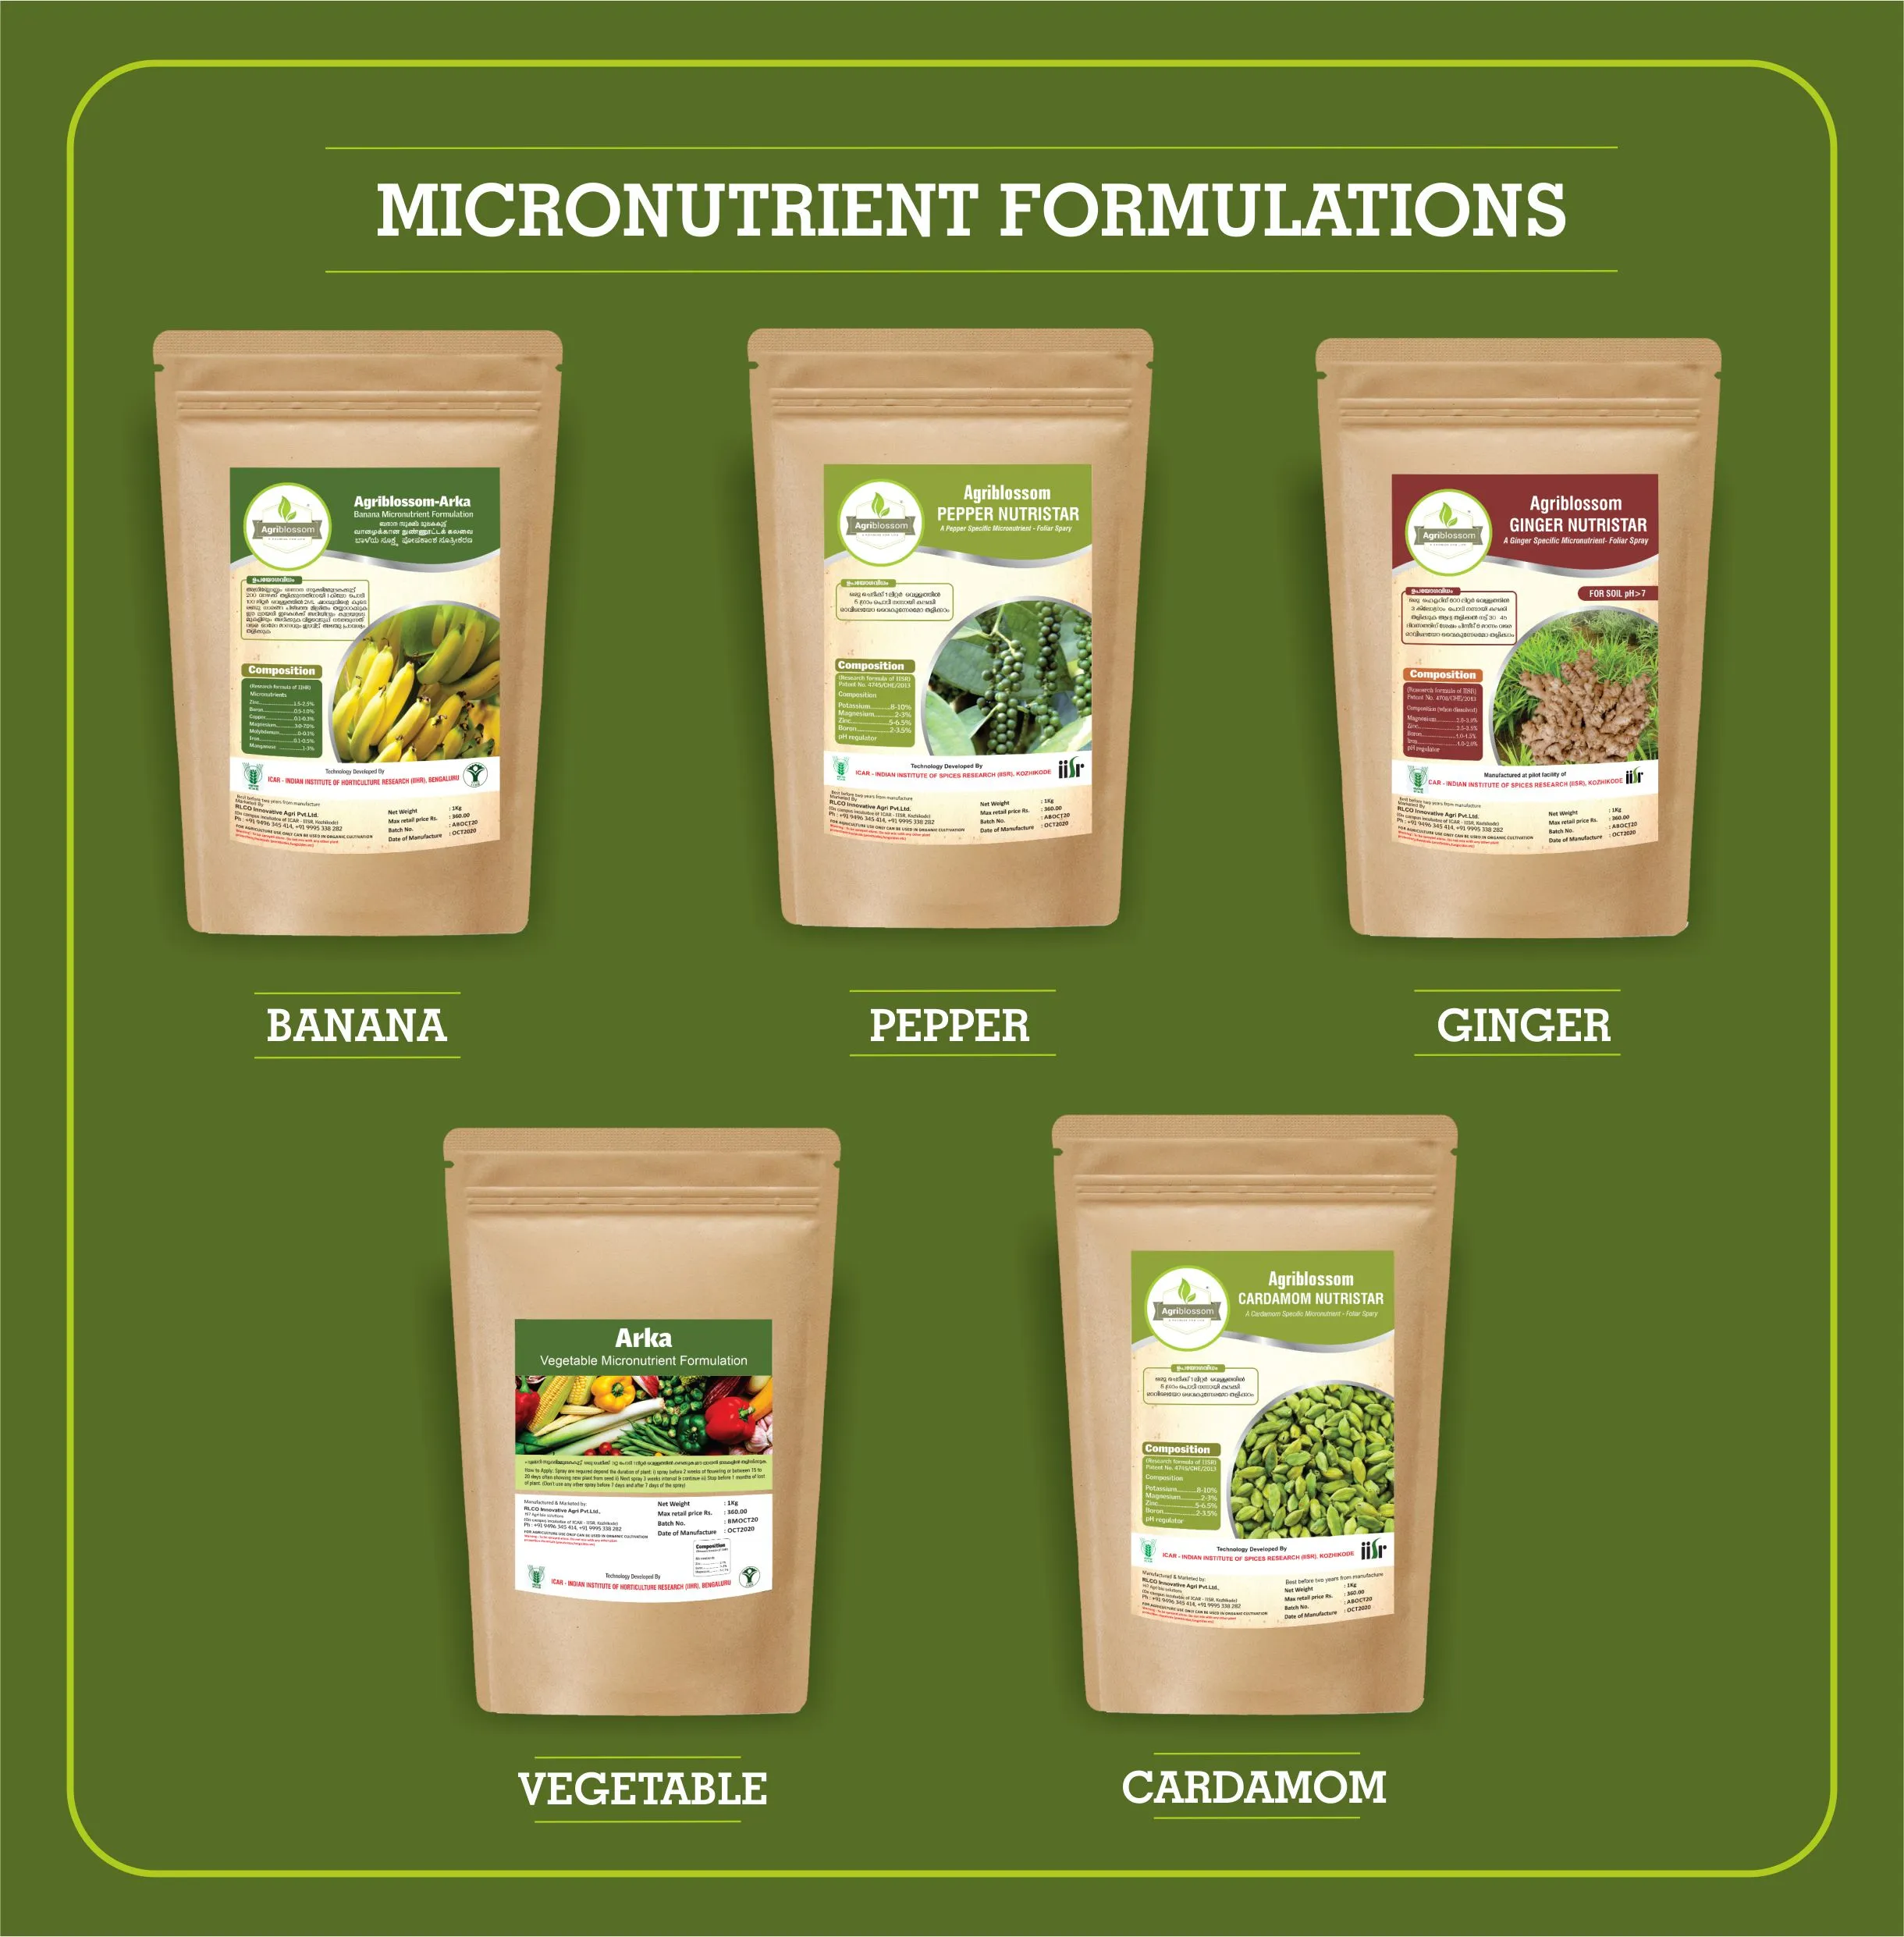 Agriblossom Micronutrients